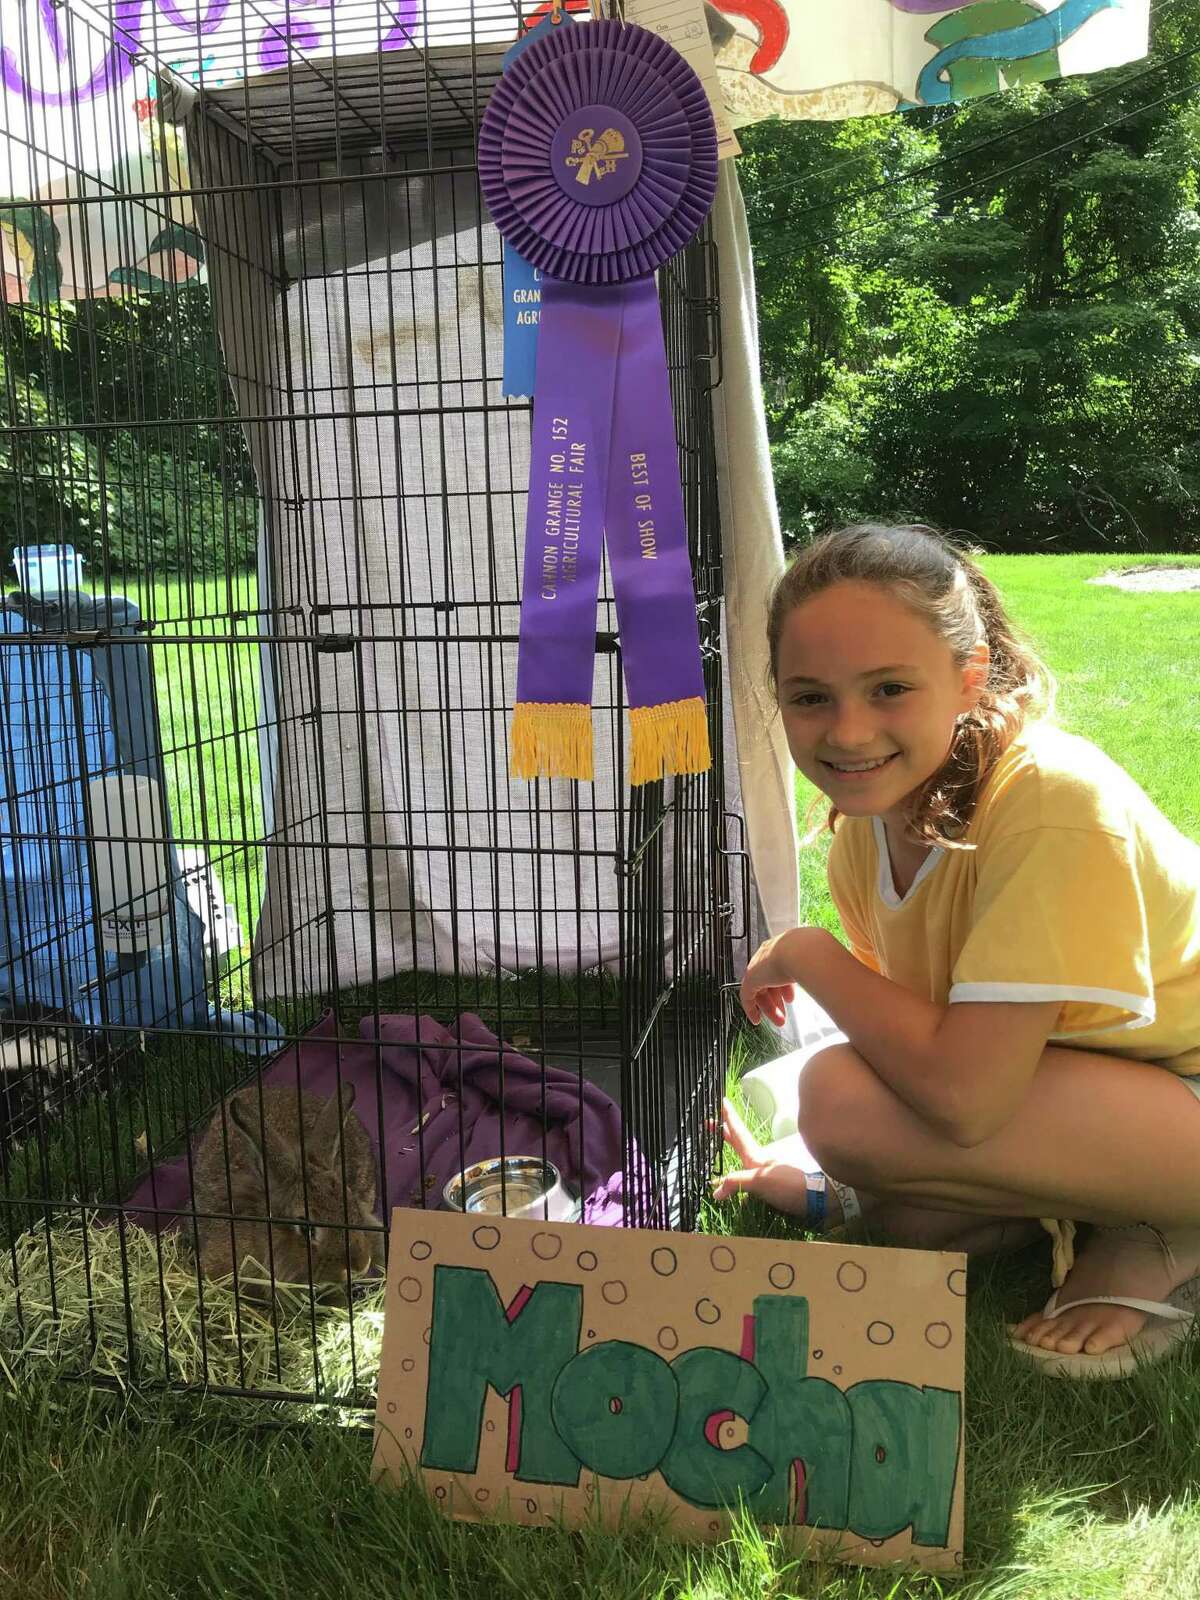 Abby Jones, 12, of Wilton, was proud to see her bunny, Mocha, win a “Best in Show” ribbon at the Cannon Grange’s 87th annual agricultural fair and exposition on Sunday, Aug. 25.